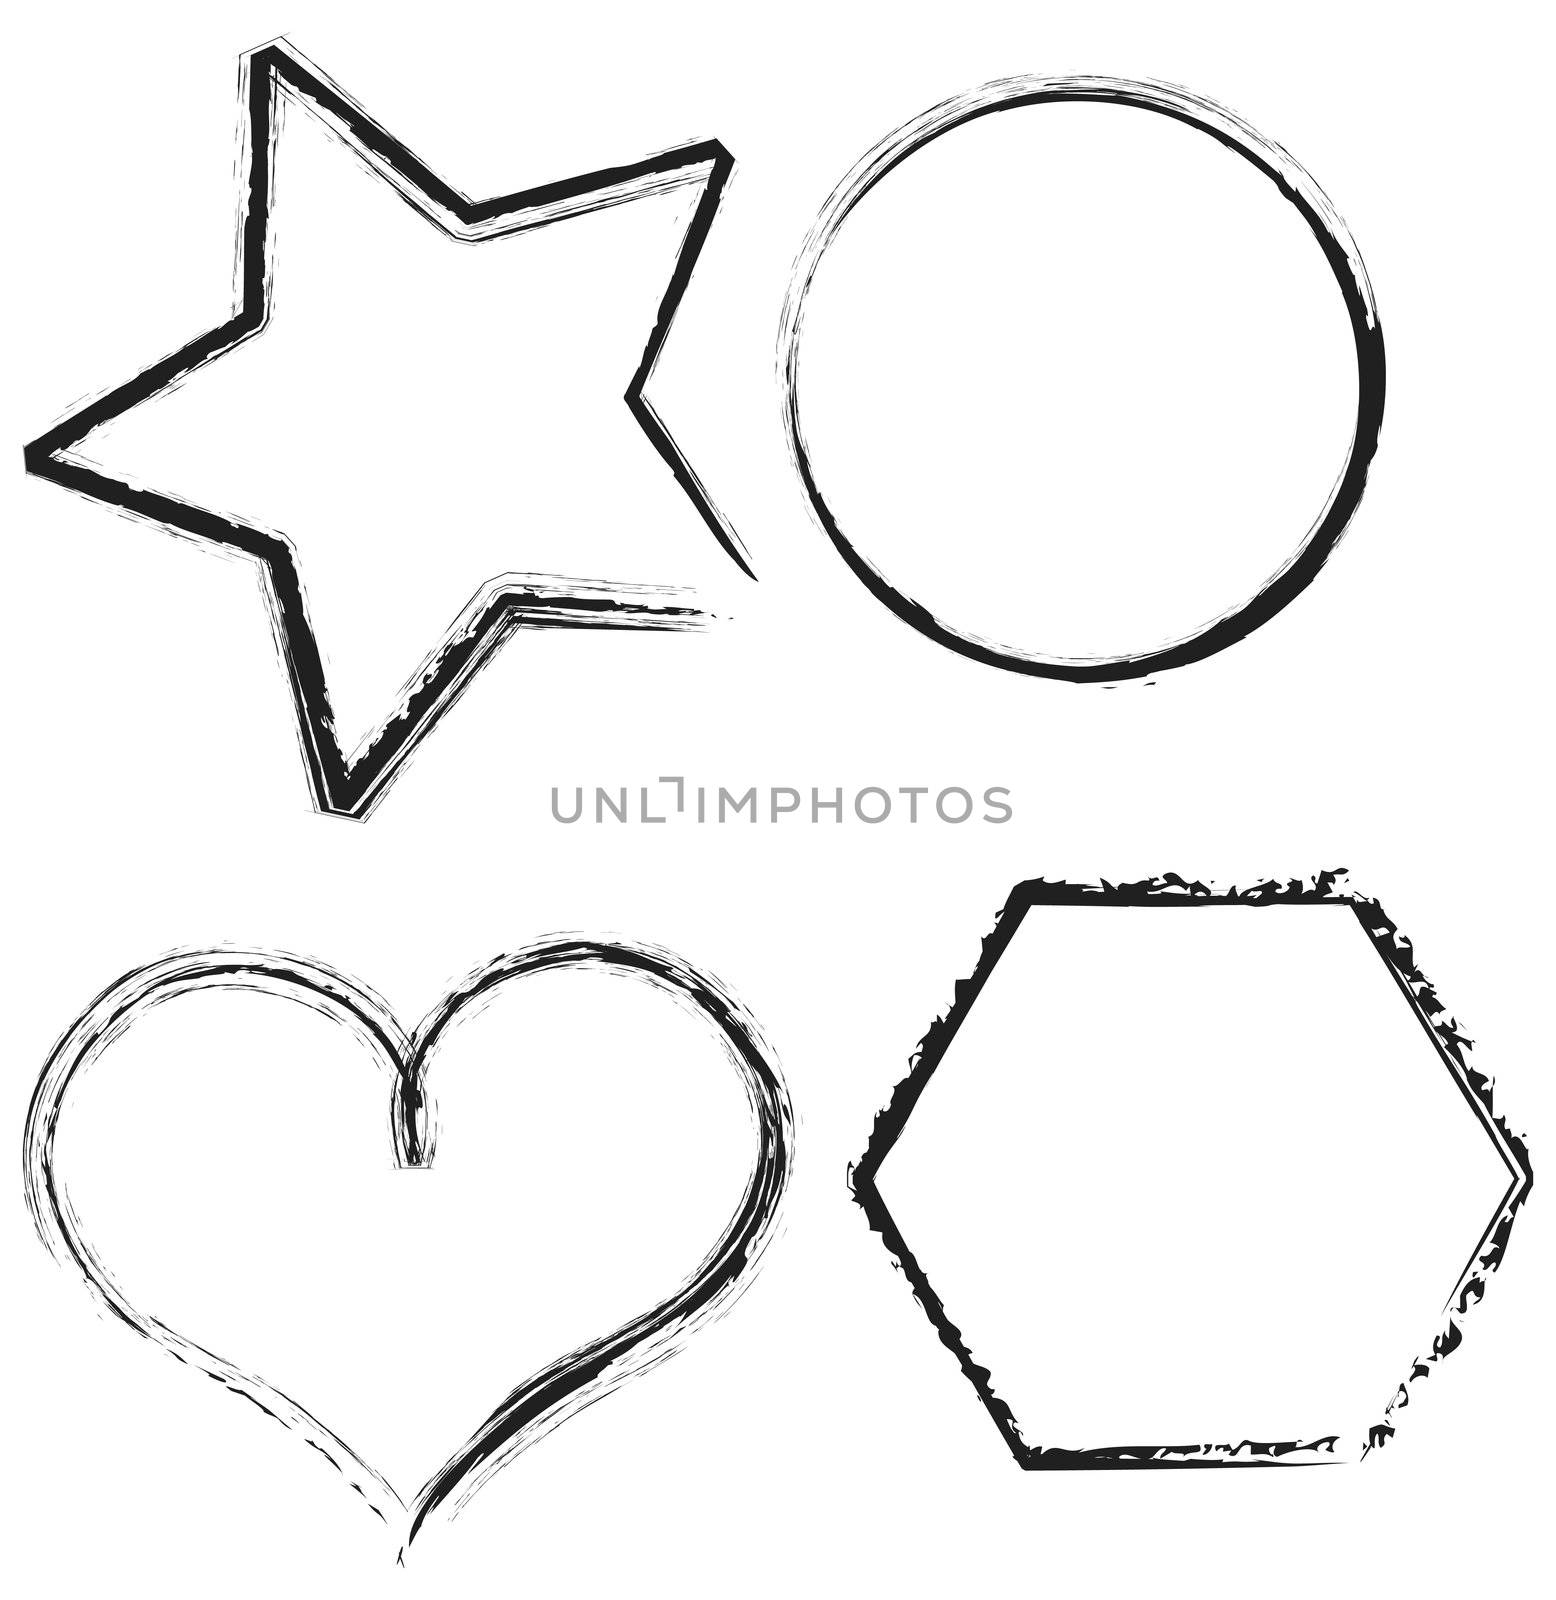 4 grungy shapes. Use as frames or design elements. Vector illustrations scale to any size.